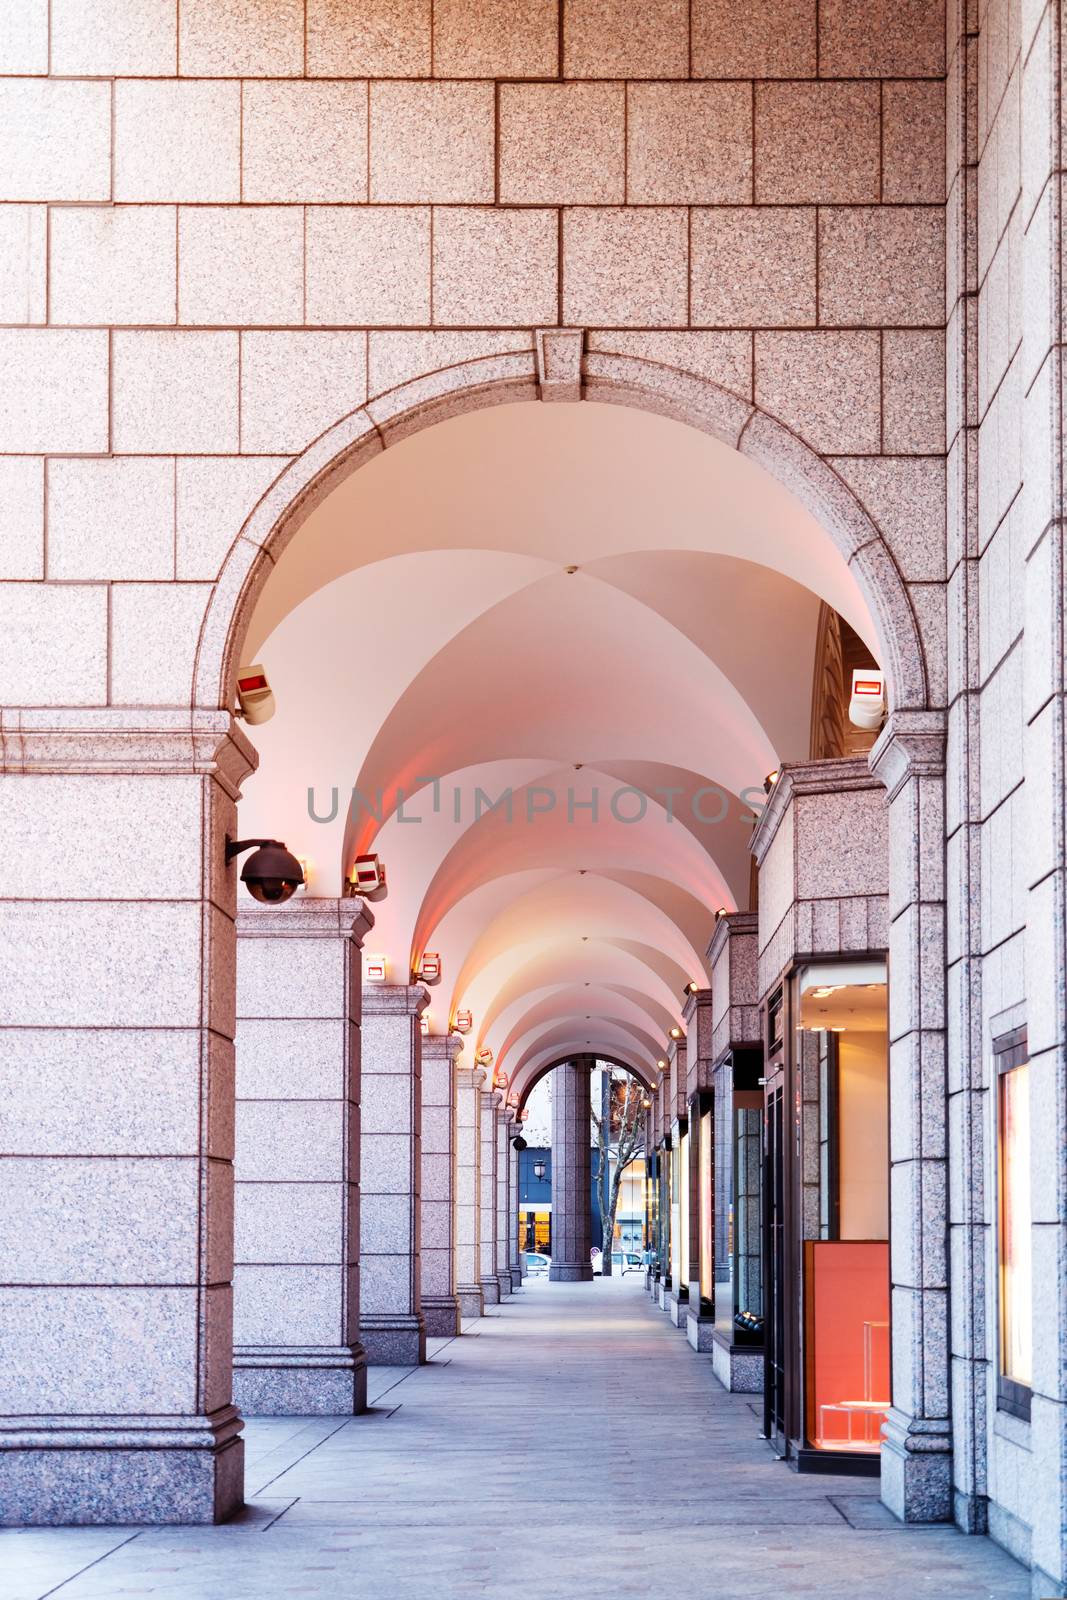 The Arched walkway at shopping mall in Sapporo Hokkaido, Japan by psodaz